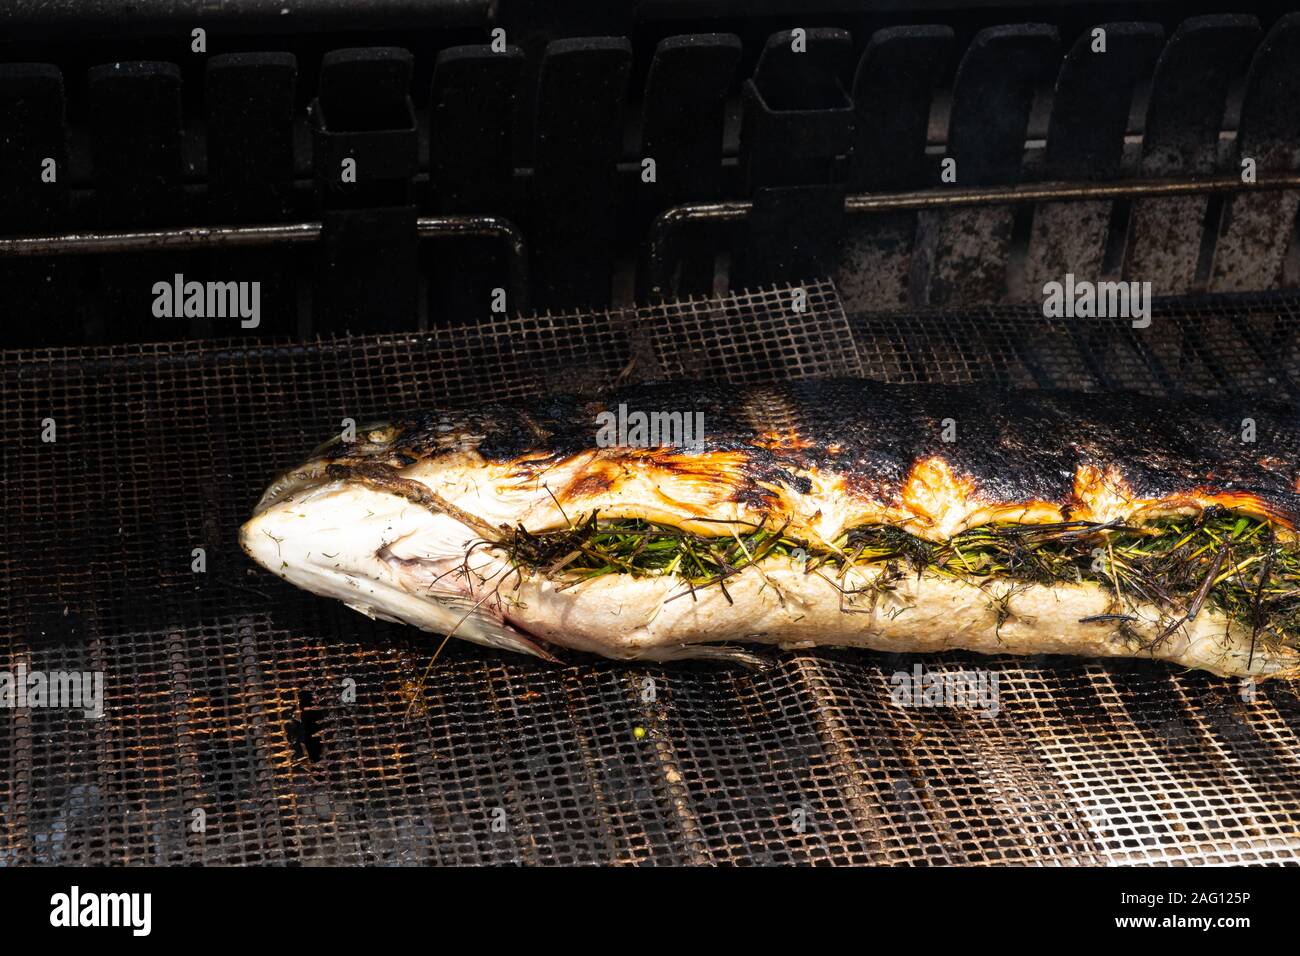 salmon stuffed with herbs grilling on the barbecue Stock Photo